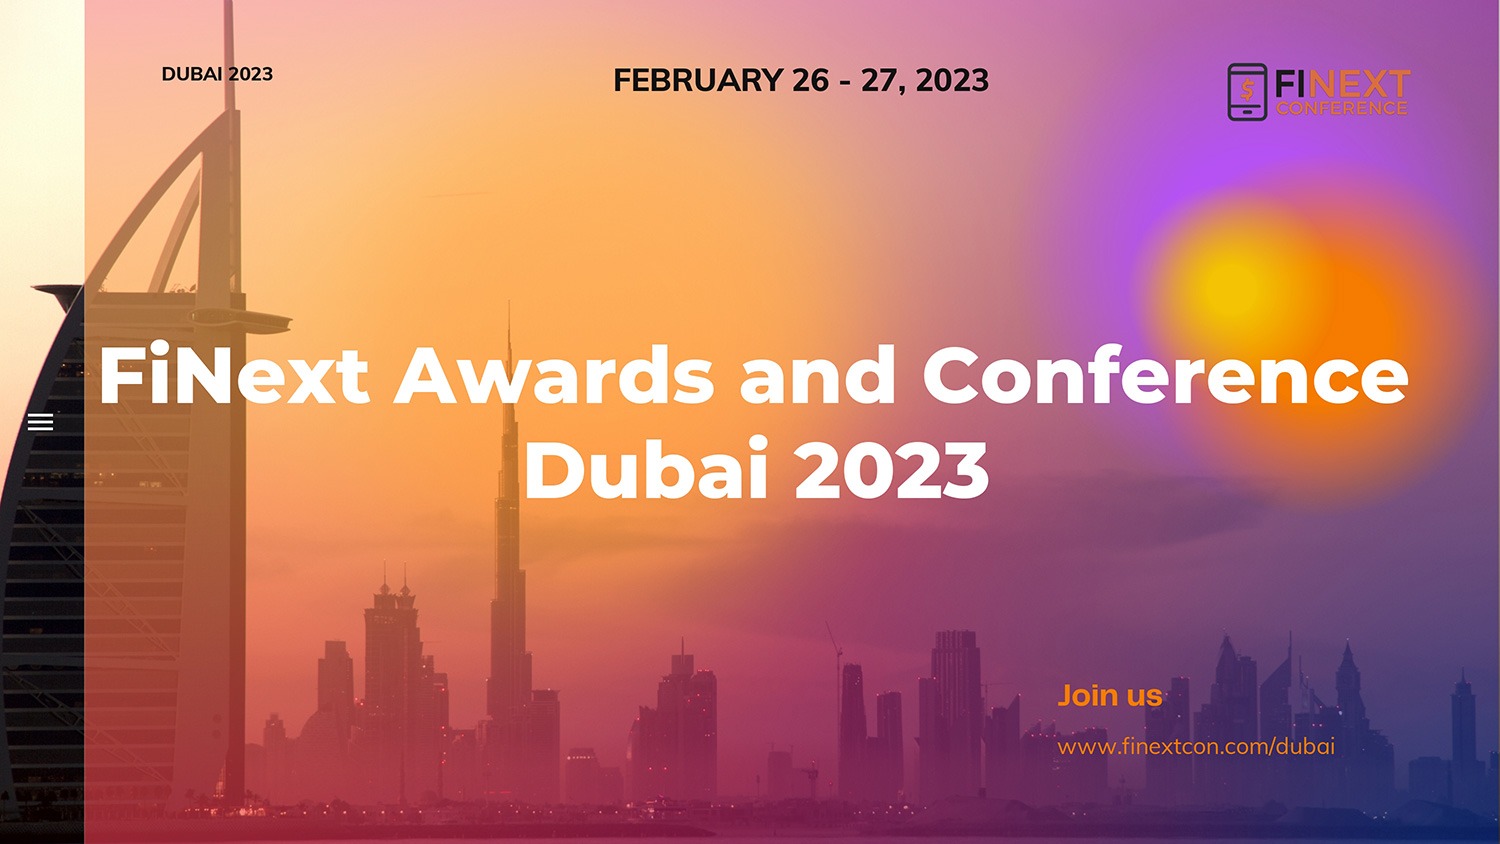 FiNext Awards and Conference Dubai 2023 - Coming Soon in UAE